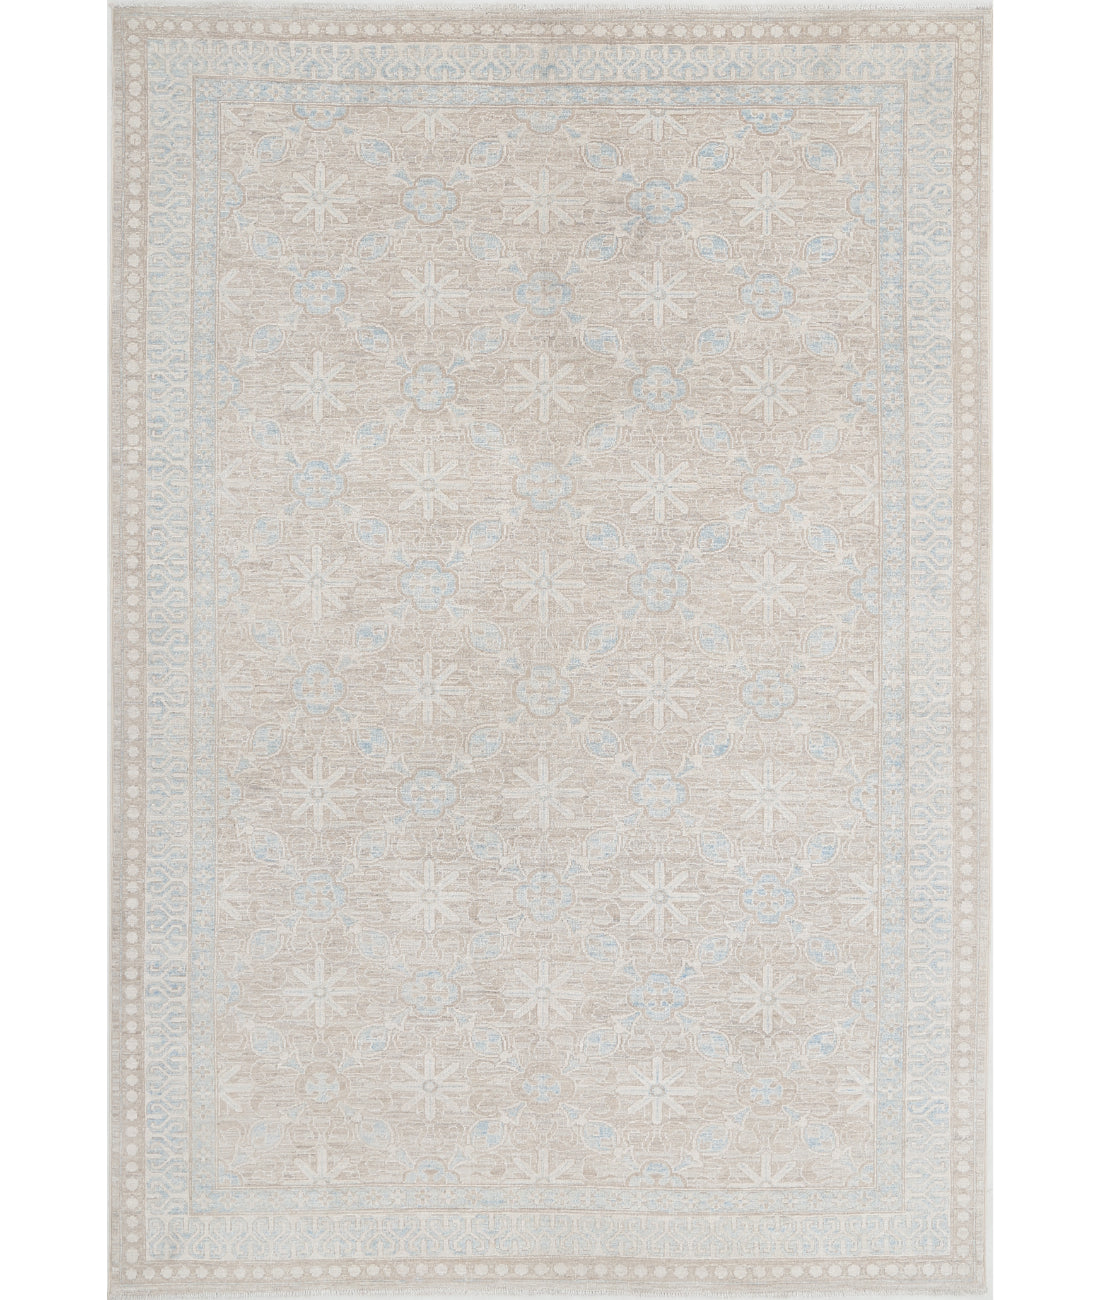 Hand Knotted Serenity Wool Rug - 5&#39;7&#39;&#39; x 8&#39;5&#39;&#39; 5&#39;7&#39;&#39; x 8&#39;5&#39;&#39; (168 X 253) / Taupe / Ivory